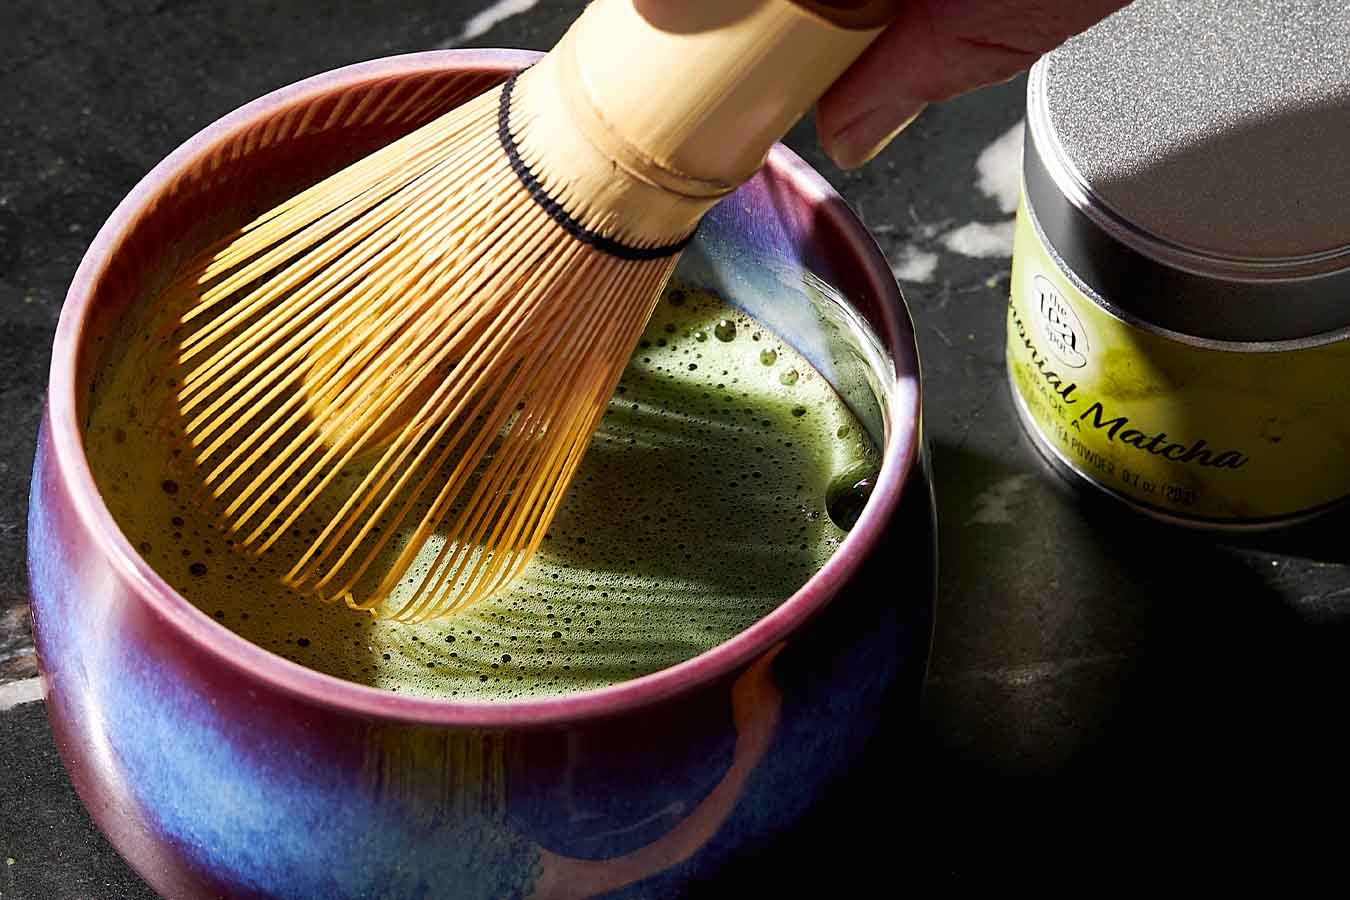 a matcha bowl has freshly brewed matcha while a matcha bamboo whisk is held above it